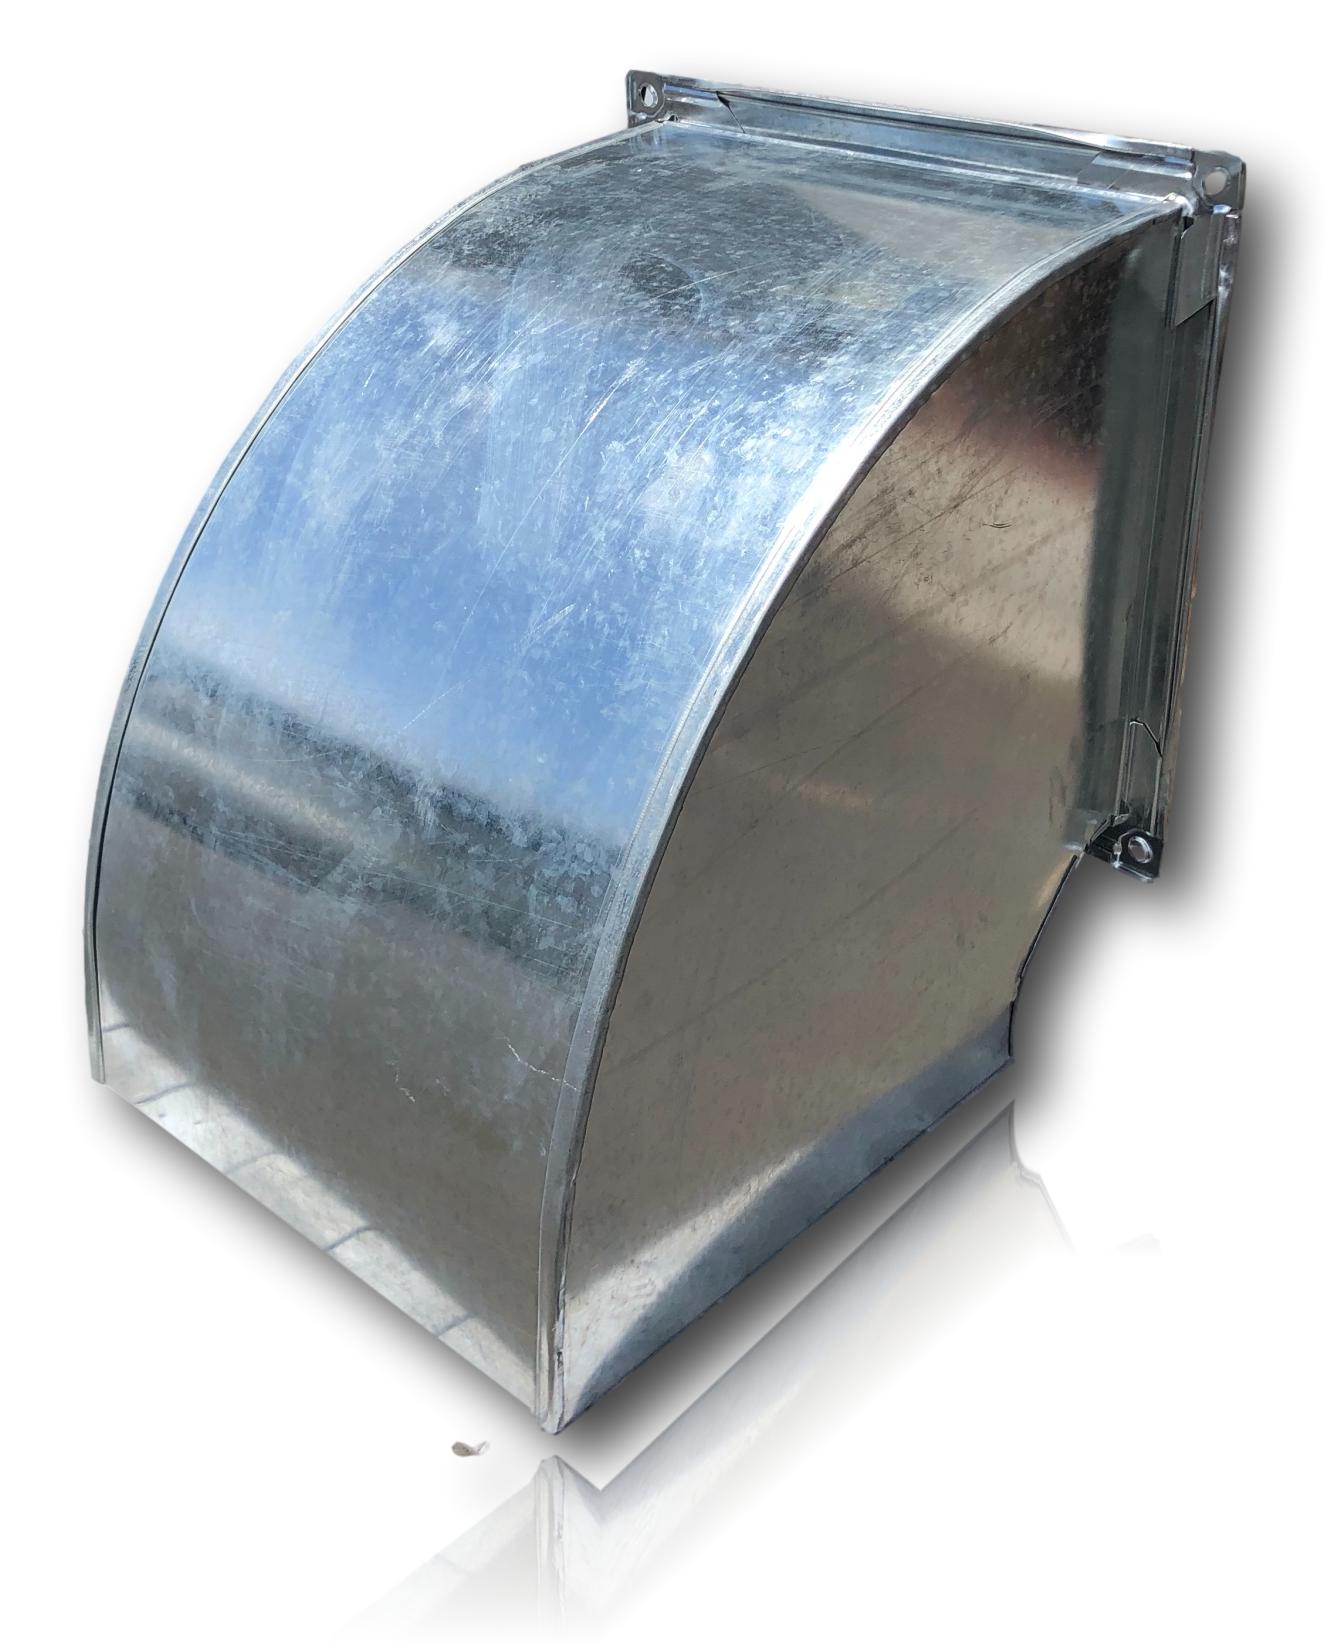  CV COWLING VENTS GALV  FIT TO ANY KIND OF WALL SIZE FROM 400-550mm